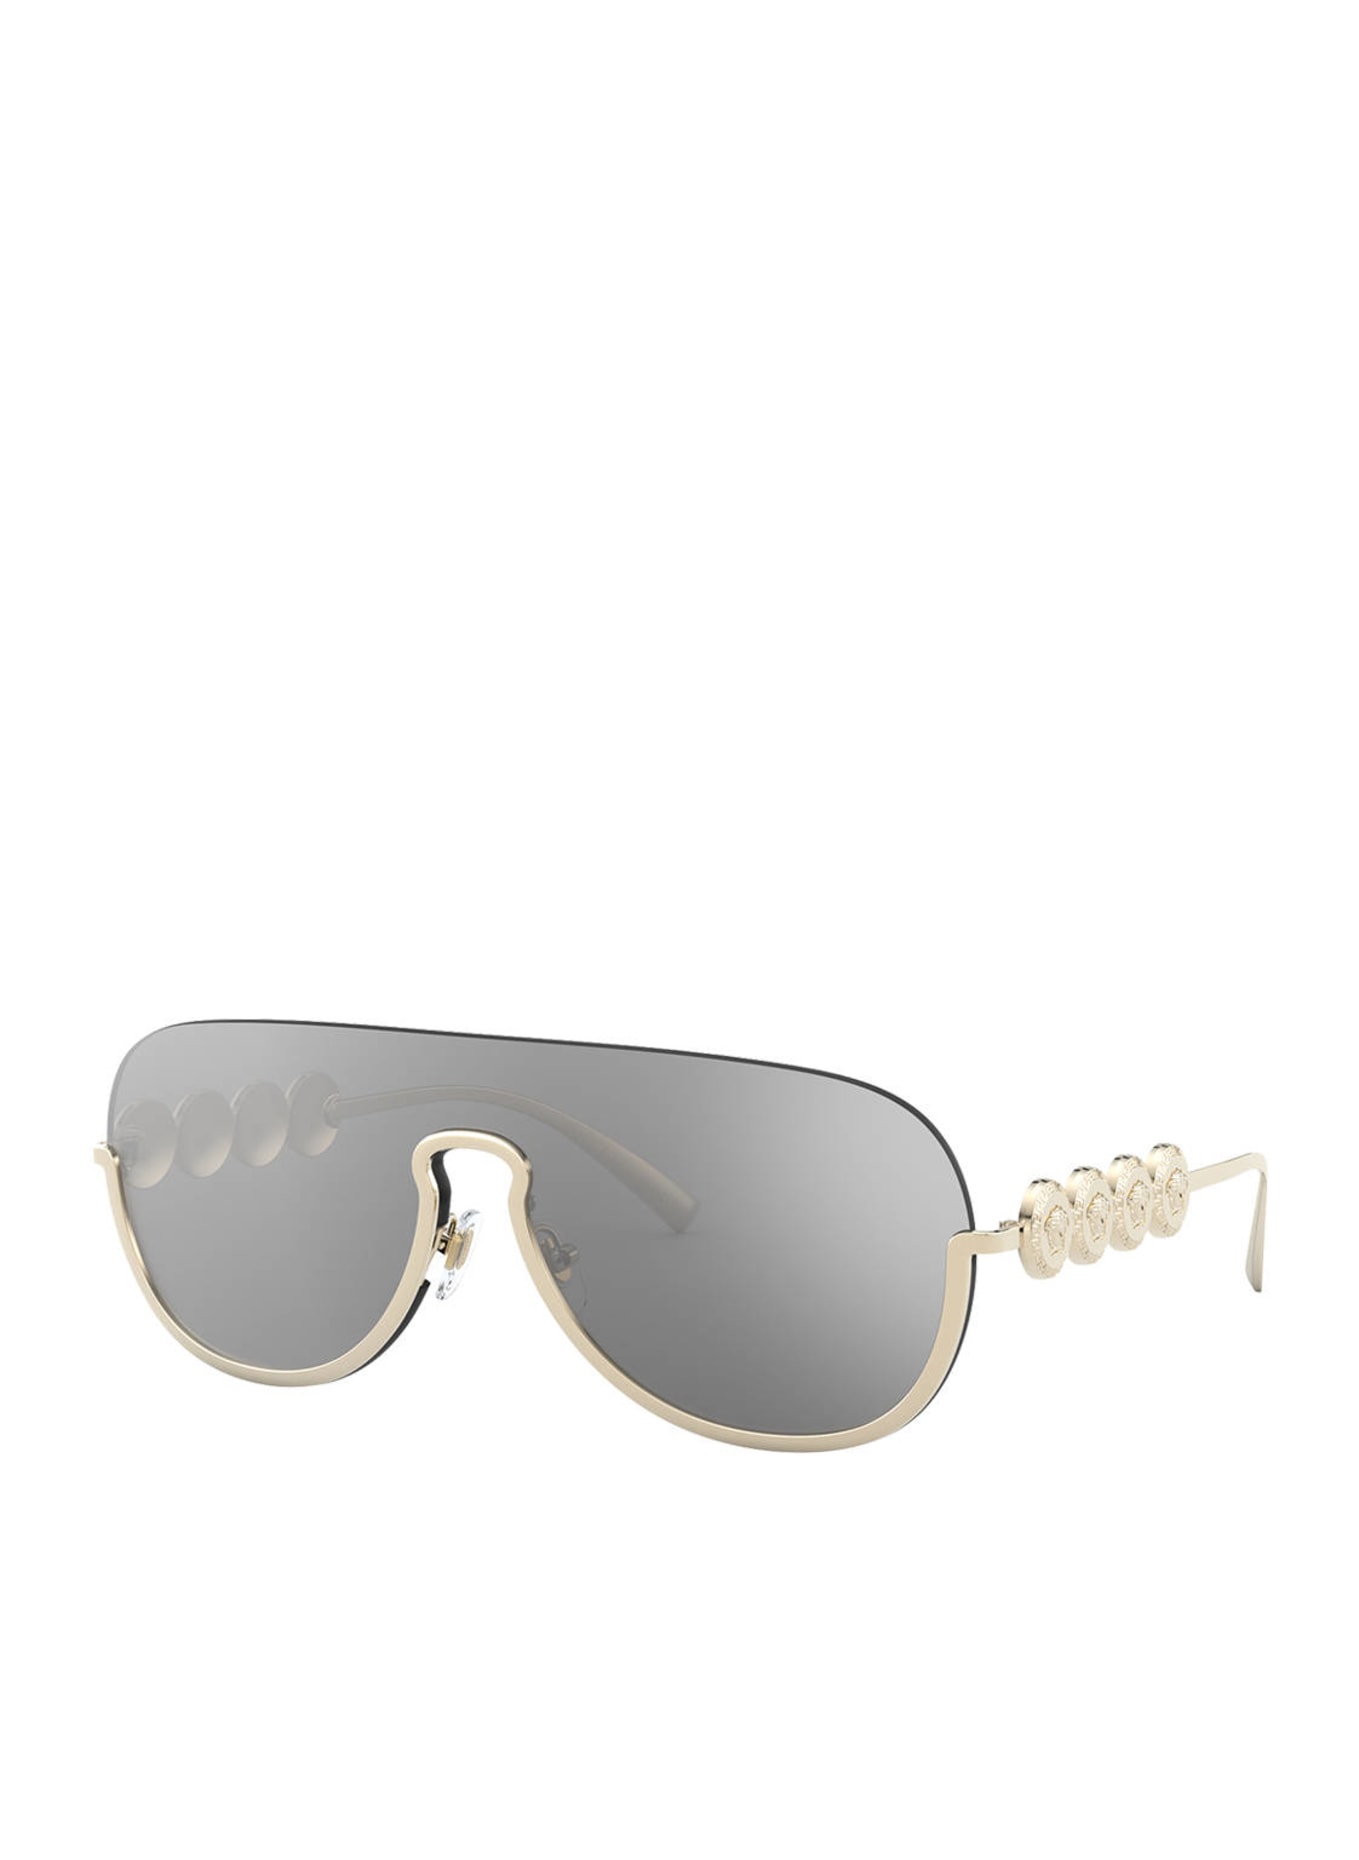 VERSACE Sunglasses VE2215 in 12526g - gold/gray mirrored